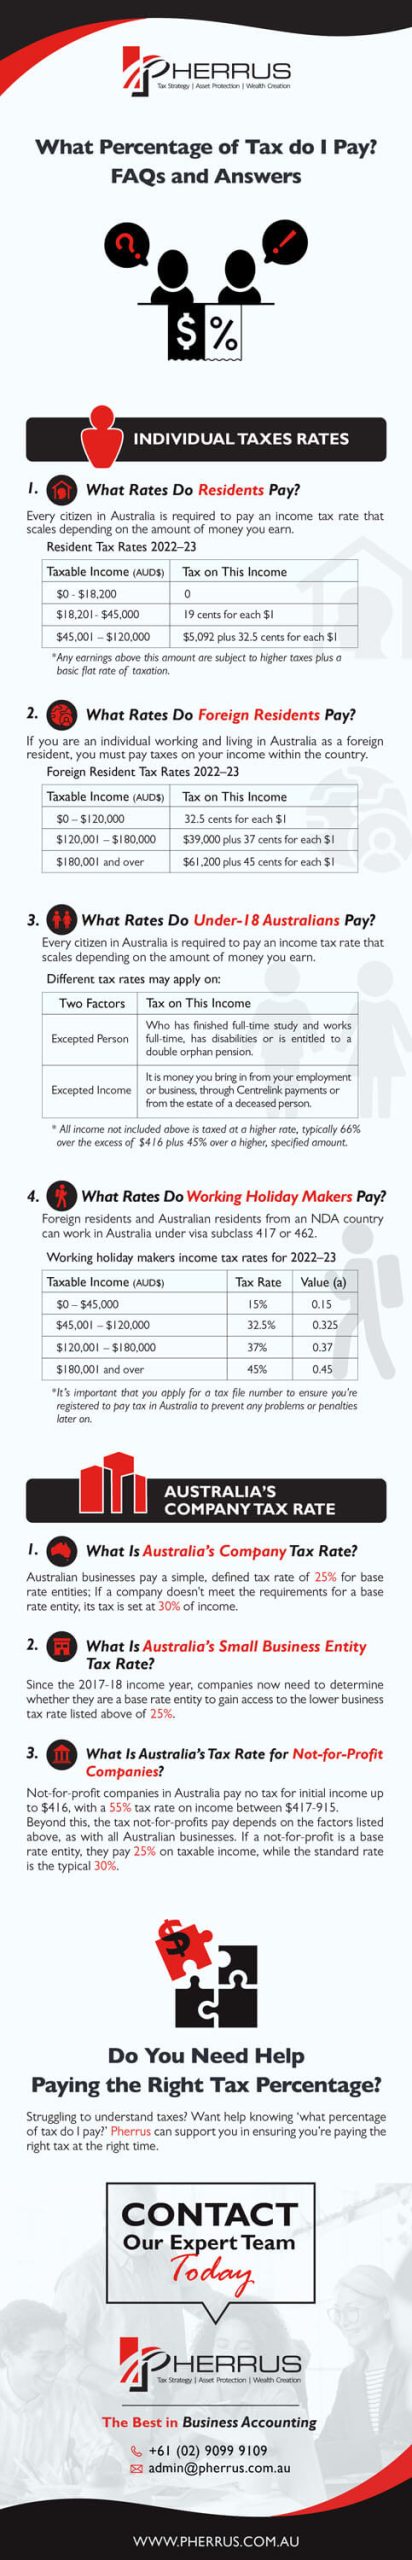 What Percentage of Tax do I Pay: FAQs and Answers infographic